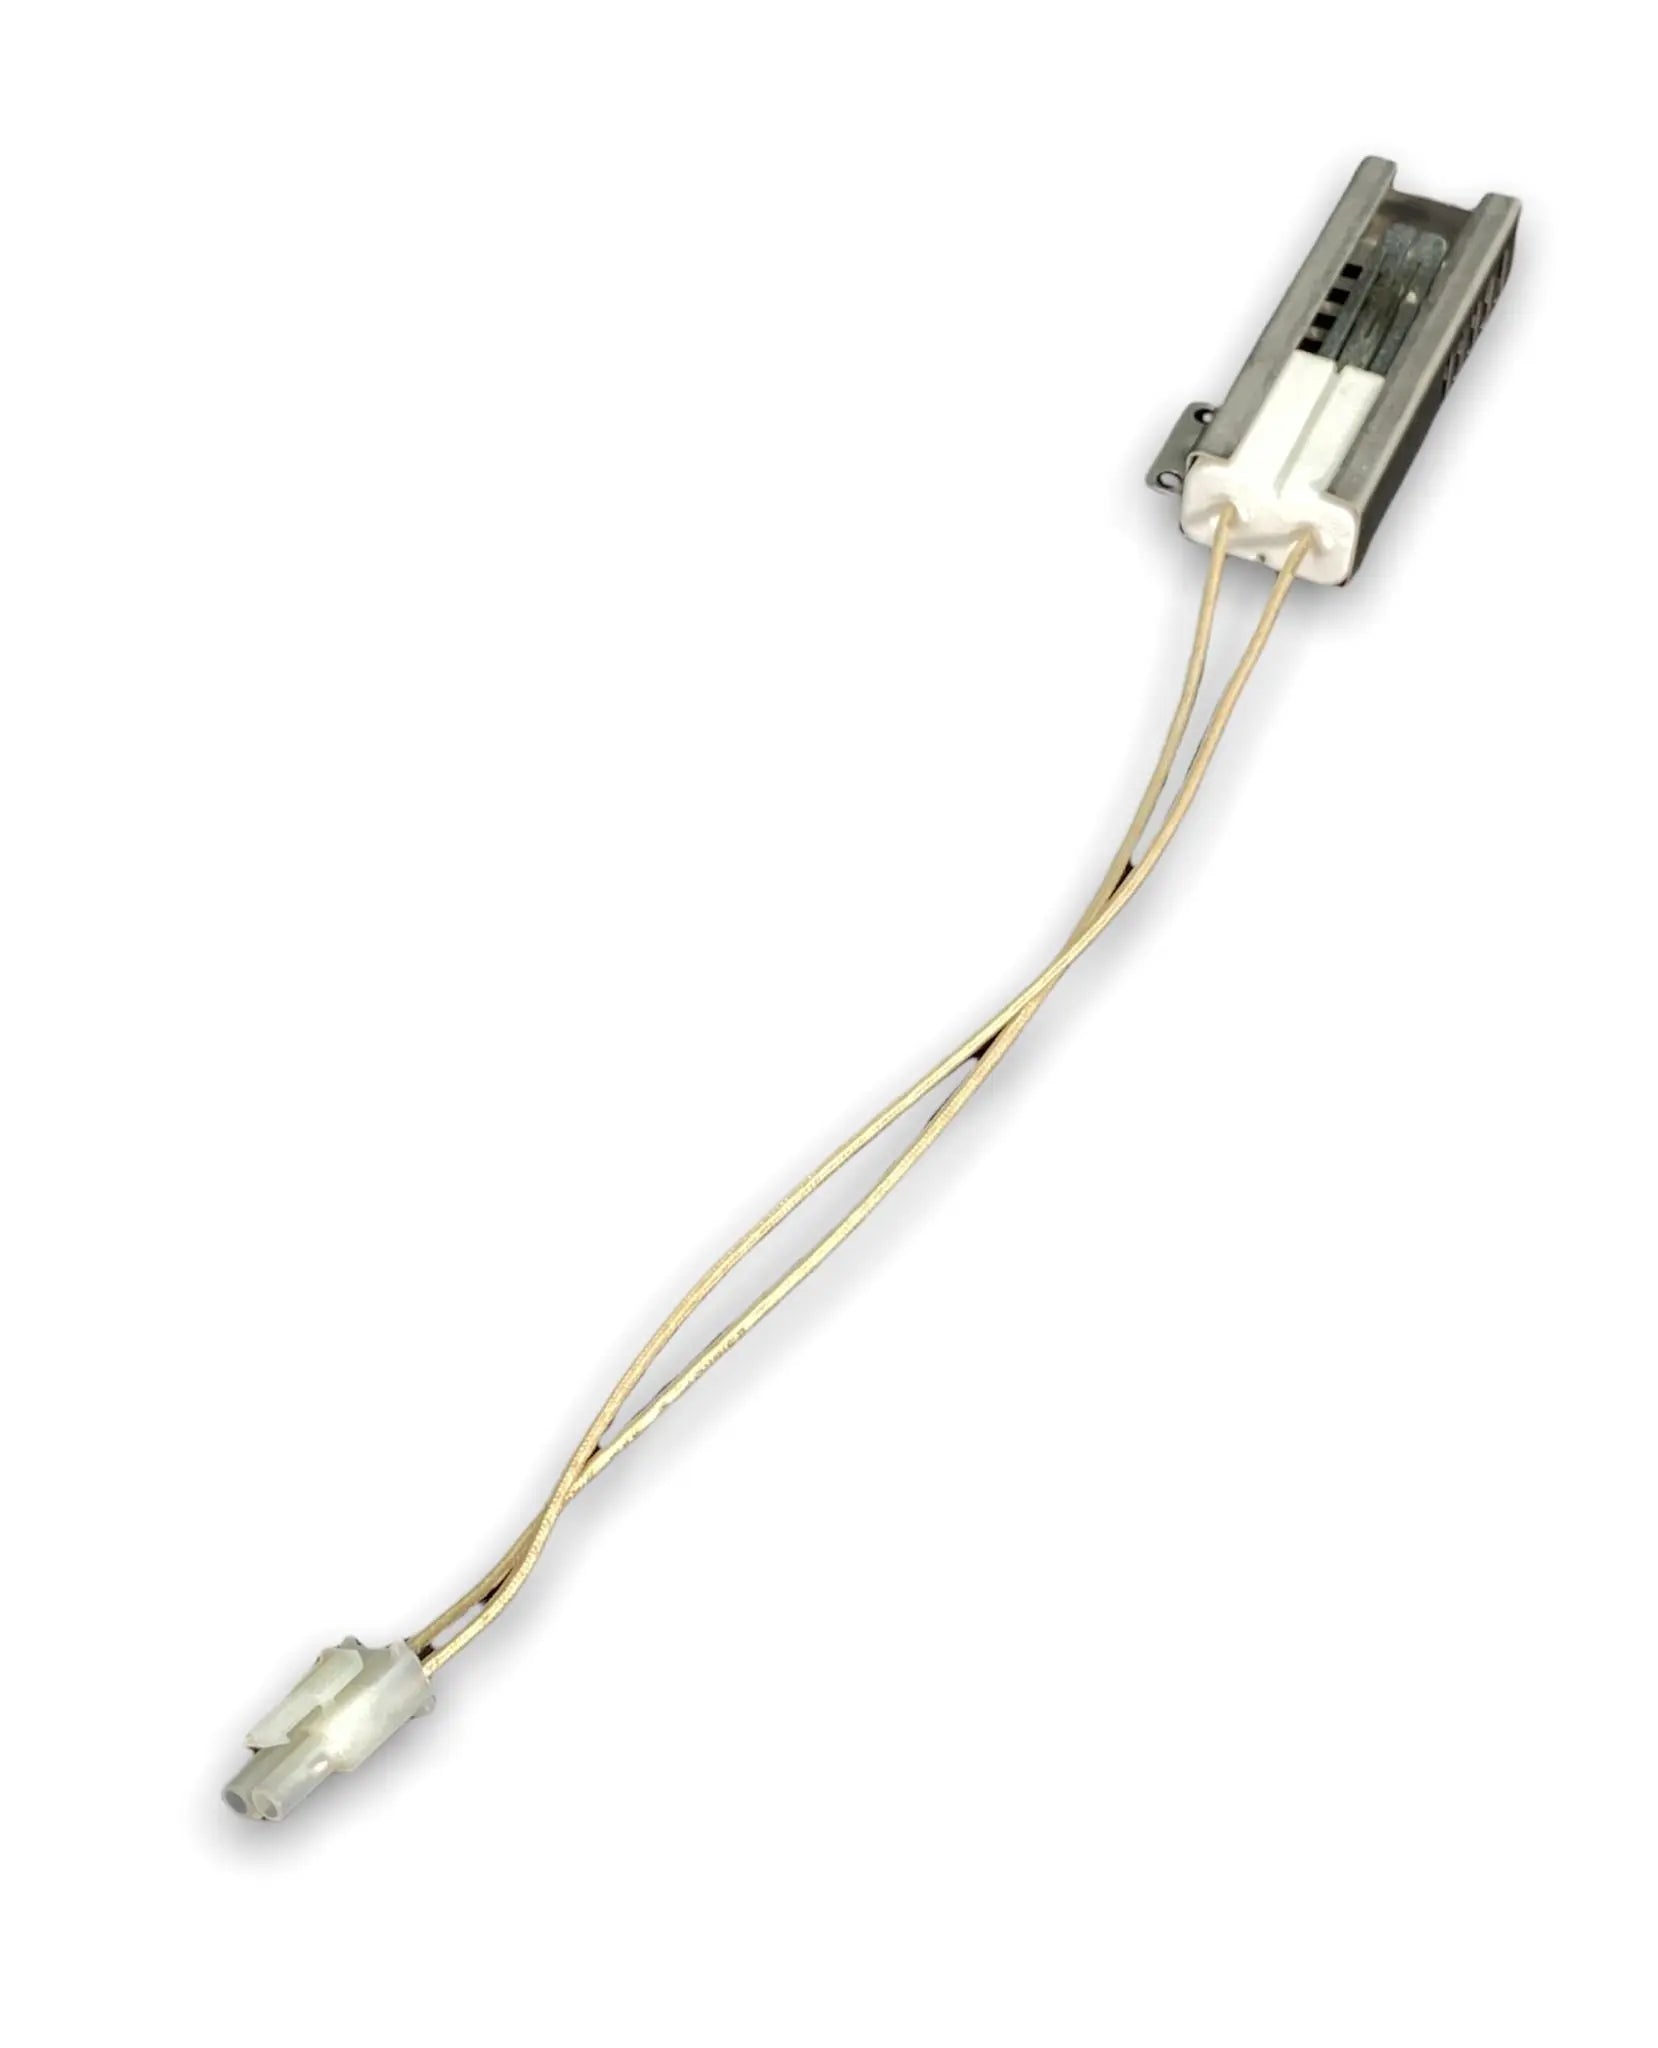 Electrolux Range Flat Gas Igniter, Hot Surface -318177710 or 7318177710, REPLACES: 2232401020 PD00000405 316428600 5303308452 5303308468 823743 AP2129143 PS444179 EAP444179 INVERTEC